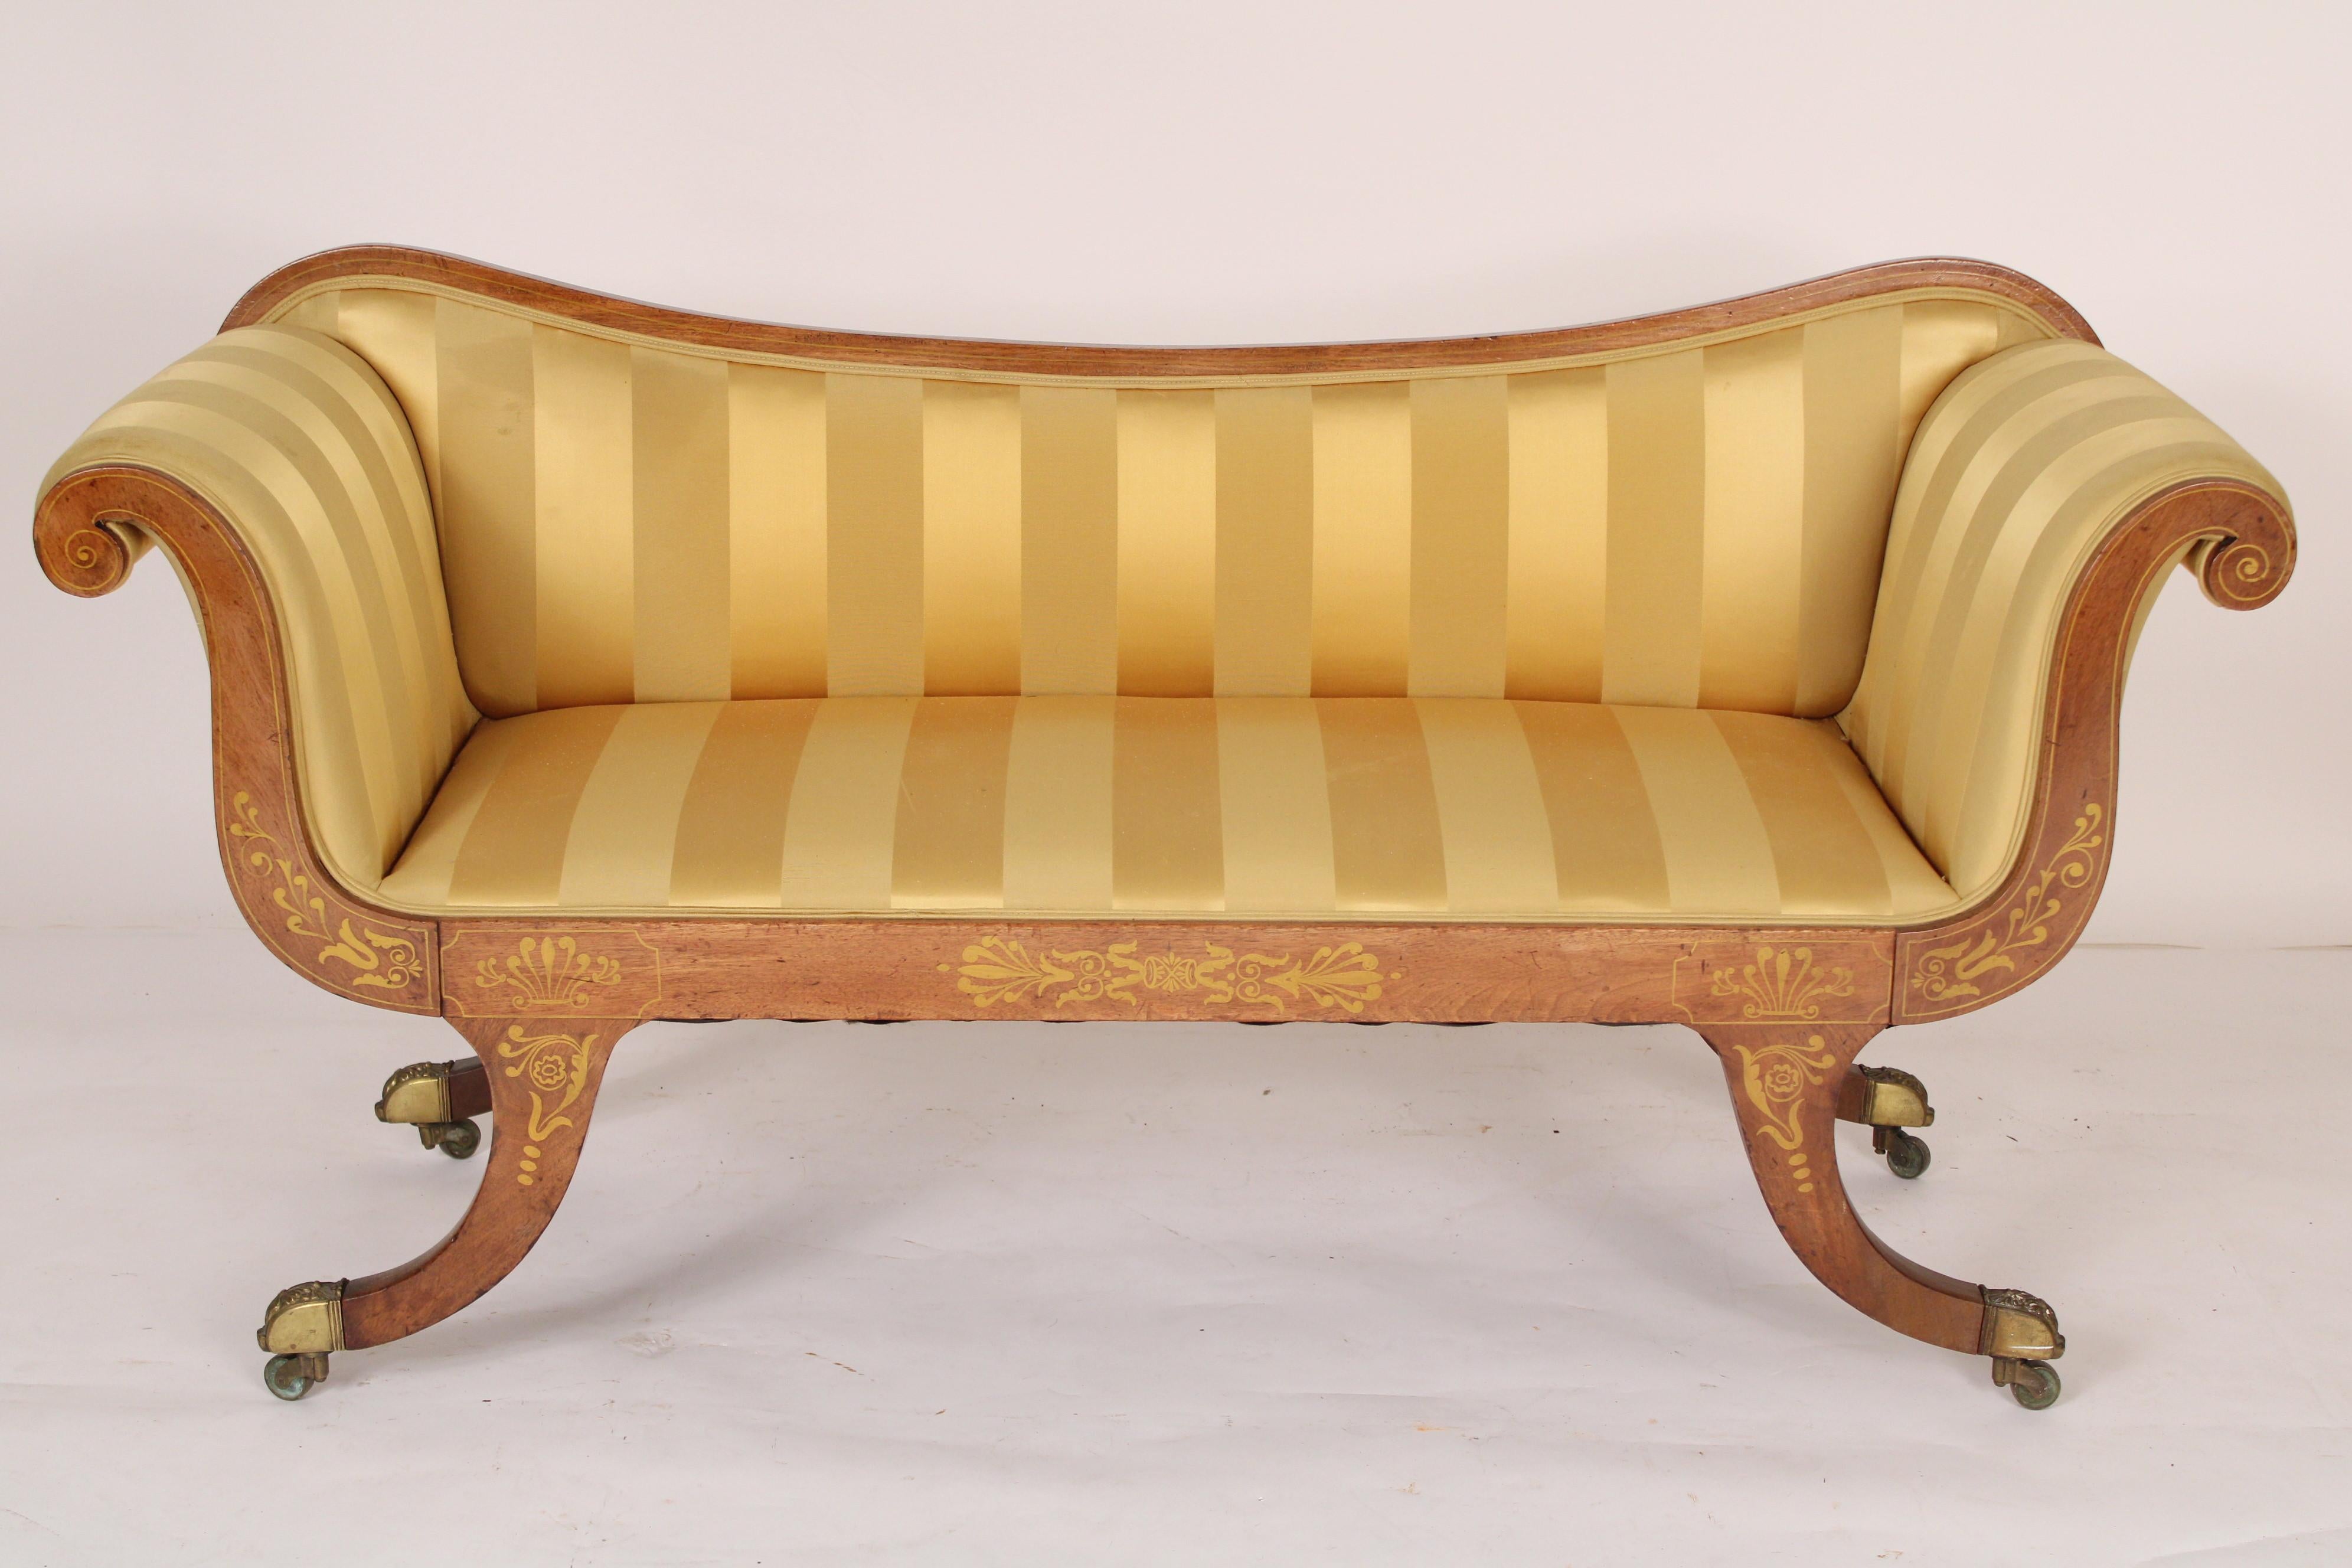 English regency painted mahogany settee with striped silk upholstery, brass feet and casters, 19th century.